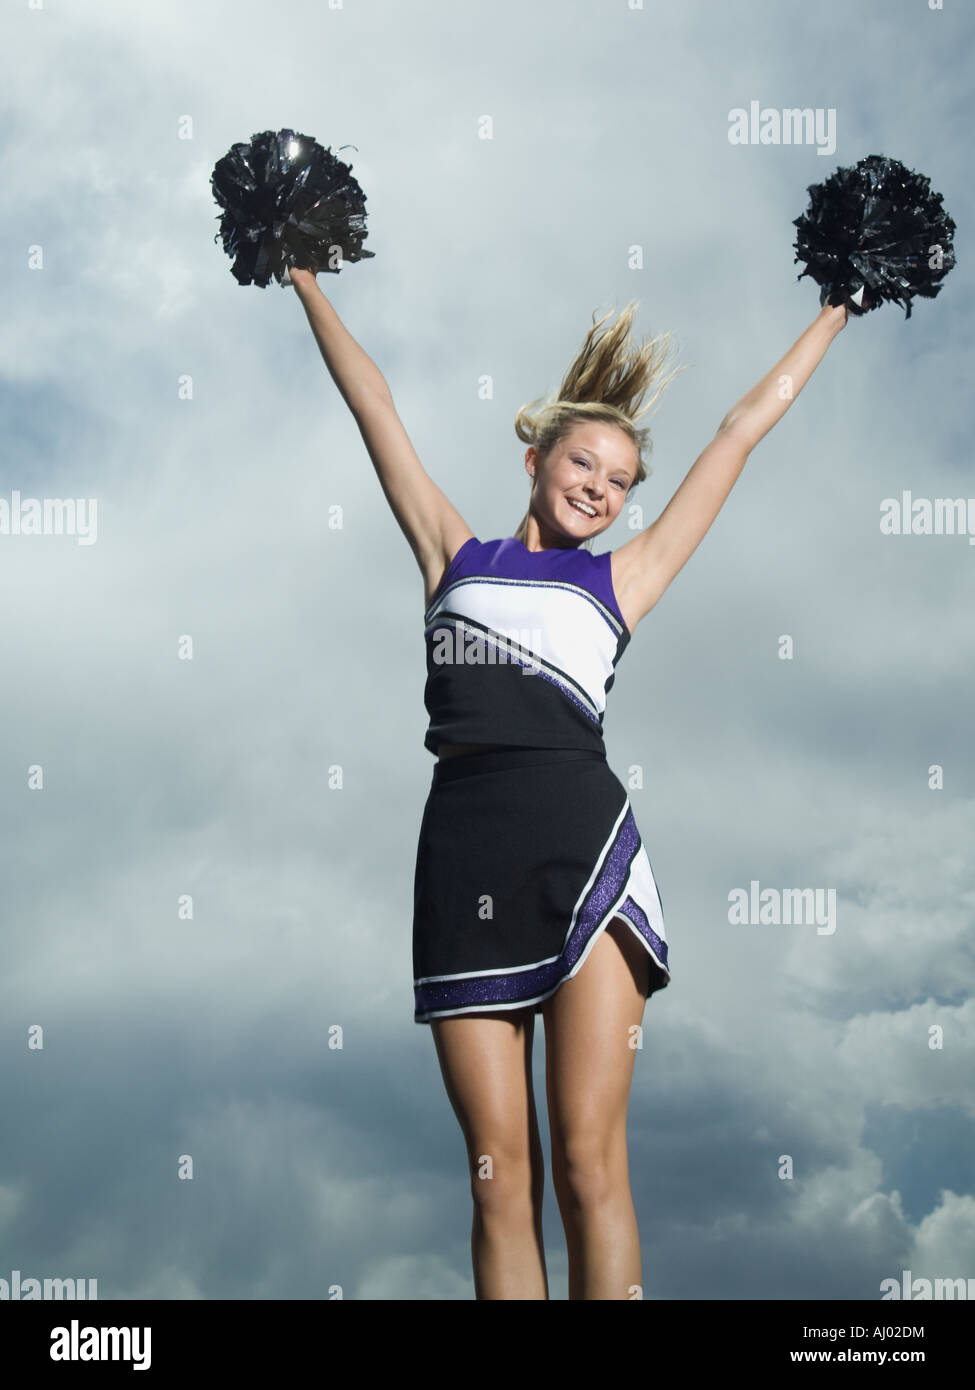 Cheerleader with pom poms jumping Stock Photo